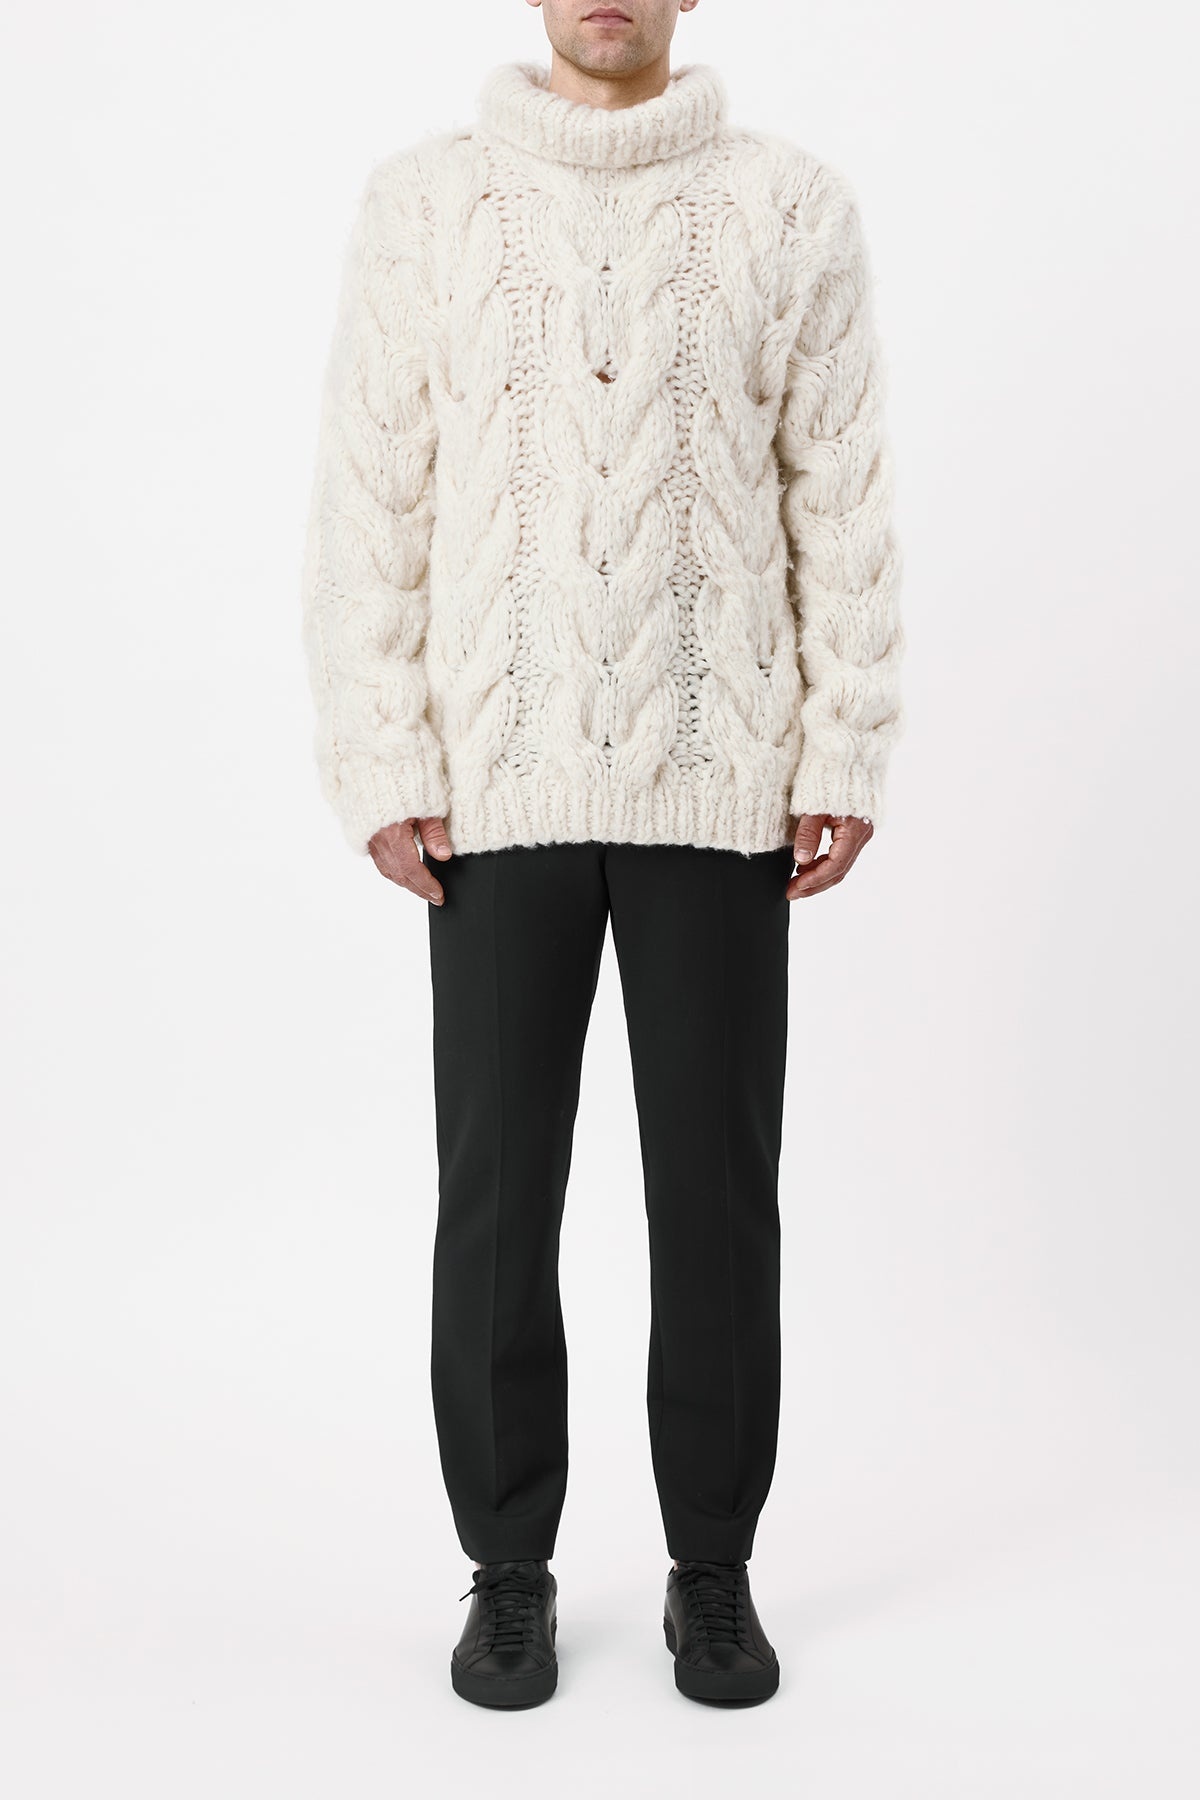 Ray Knit Sweater in Ivory Welfat Cashmere - 3